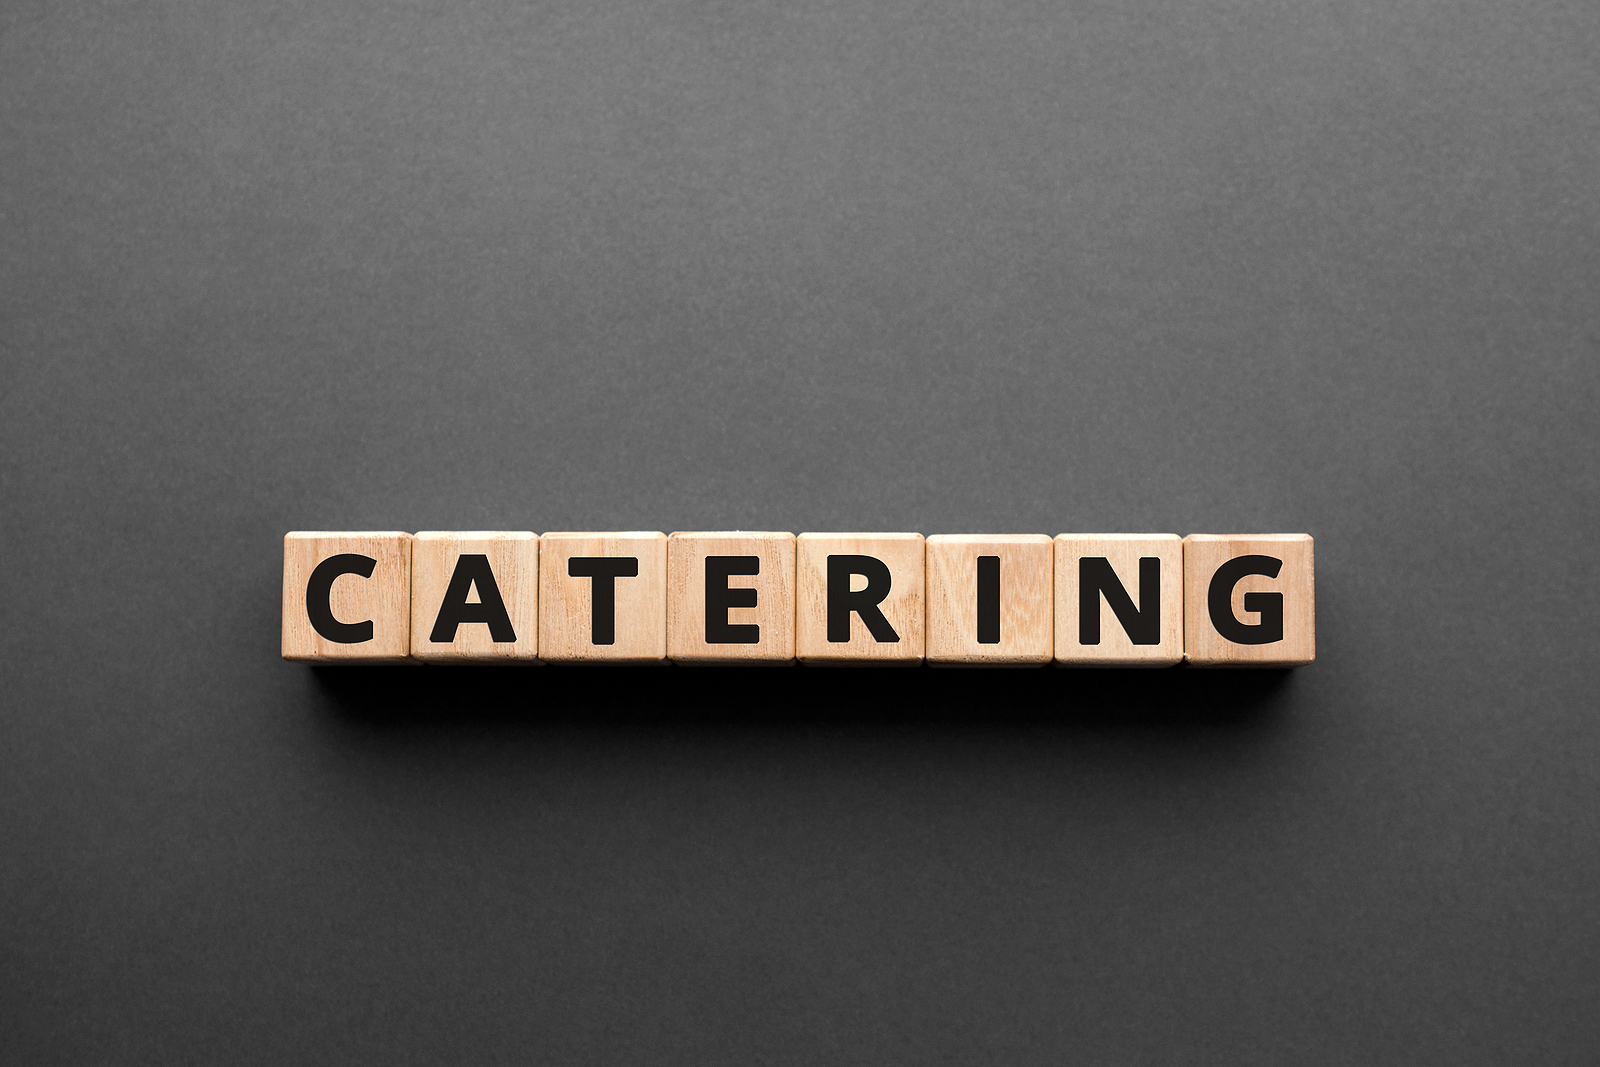 Catering - words from wooden blocks with letters, making or serving food catering concept, top view gray background